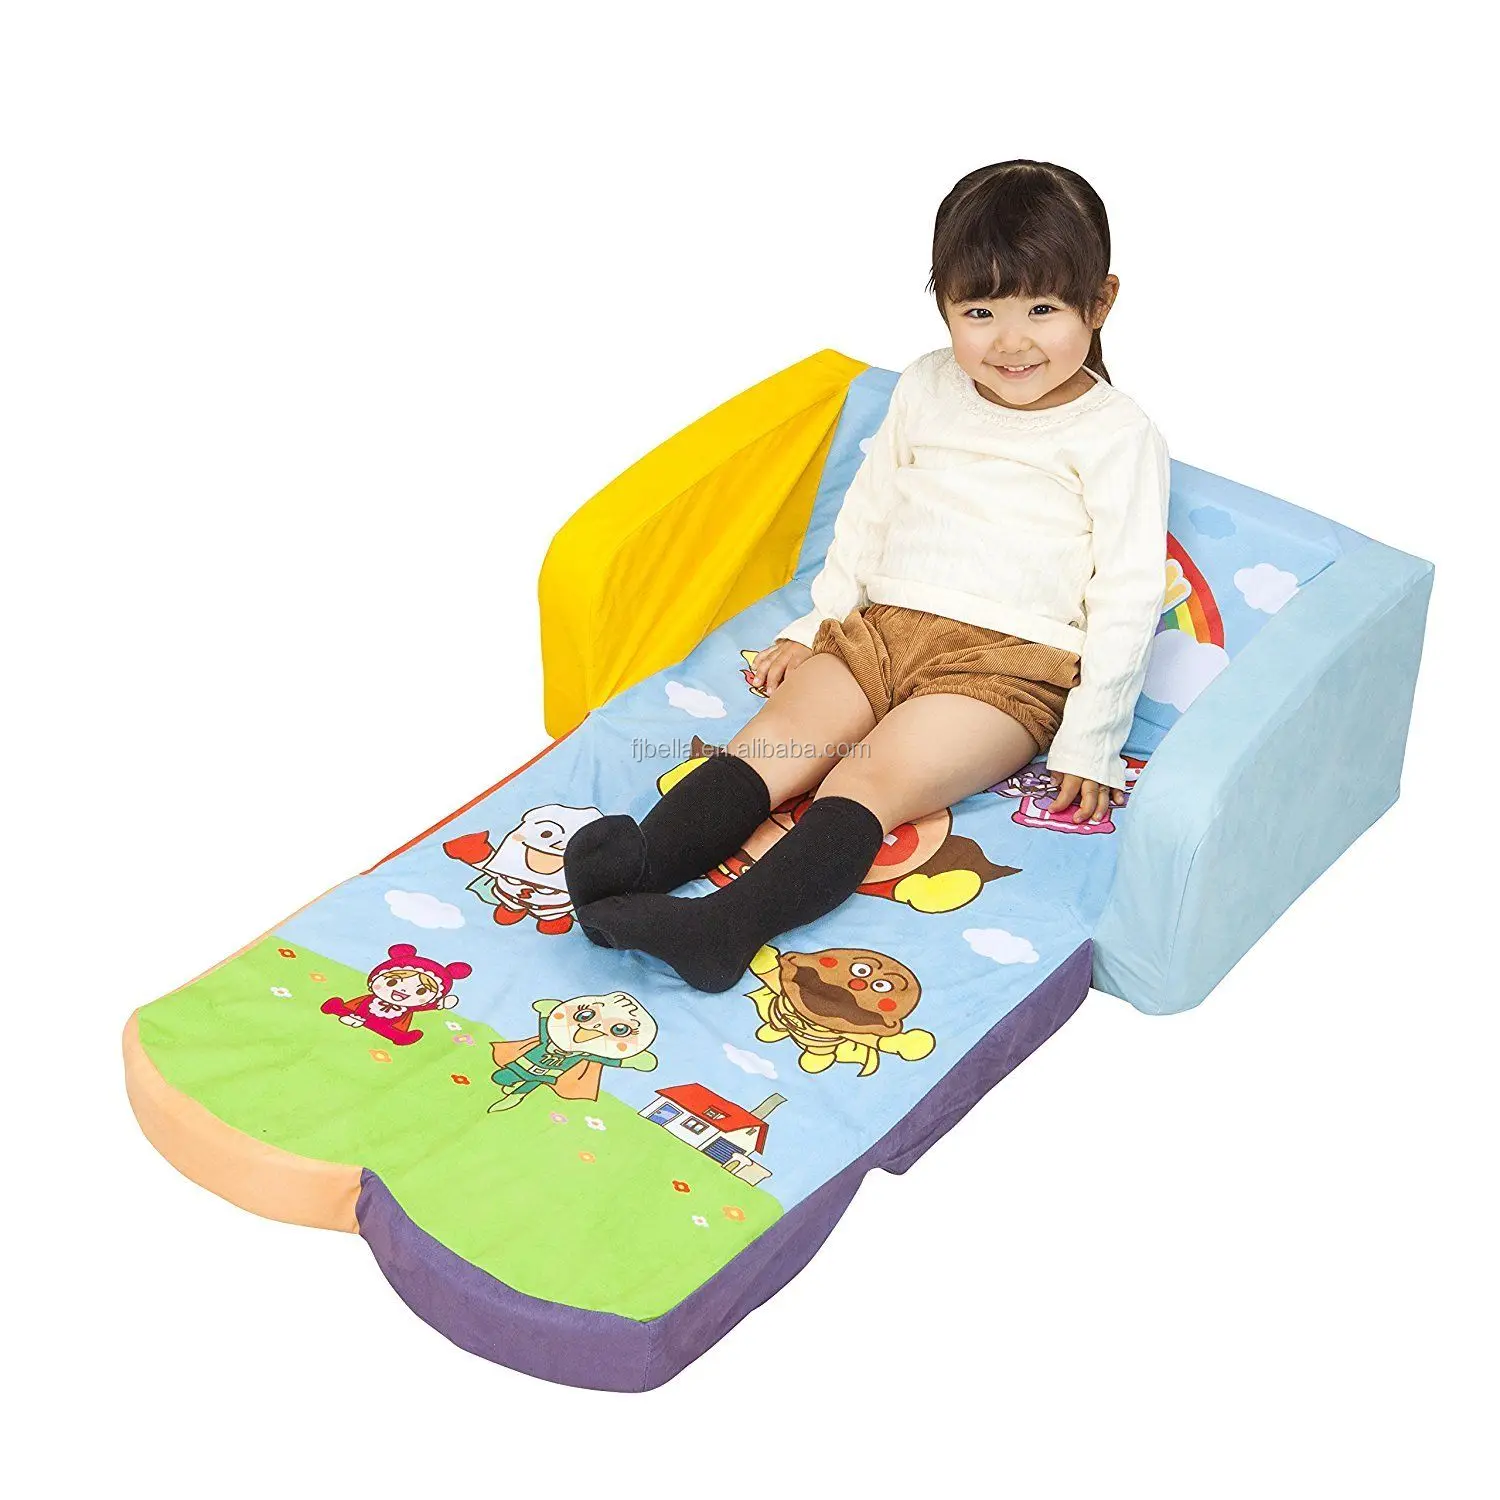 child's foam chair bed